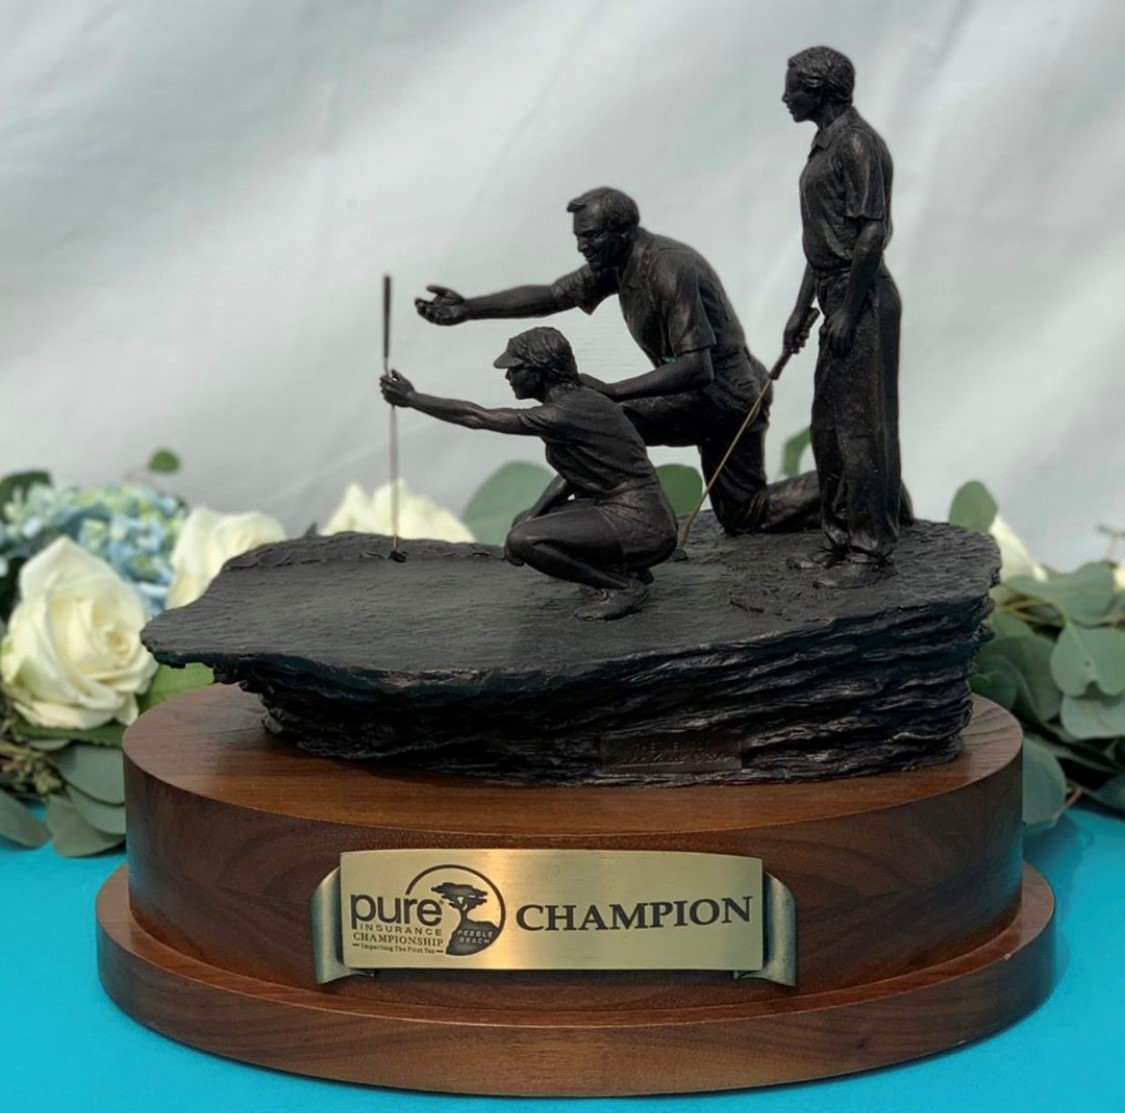 PURE Insurance Championship trophy by Malcolm DeMille